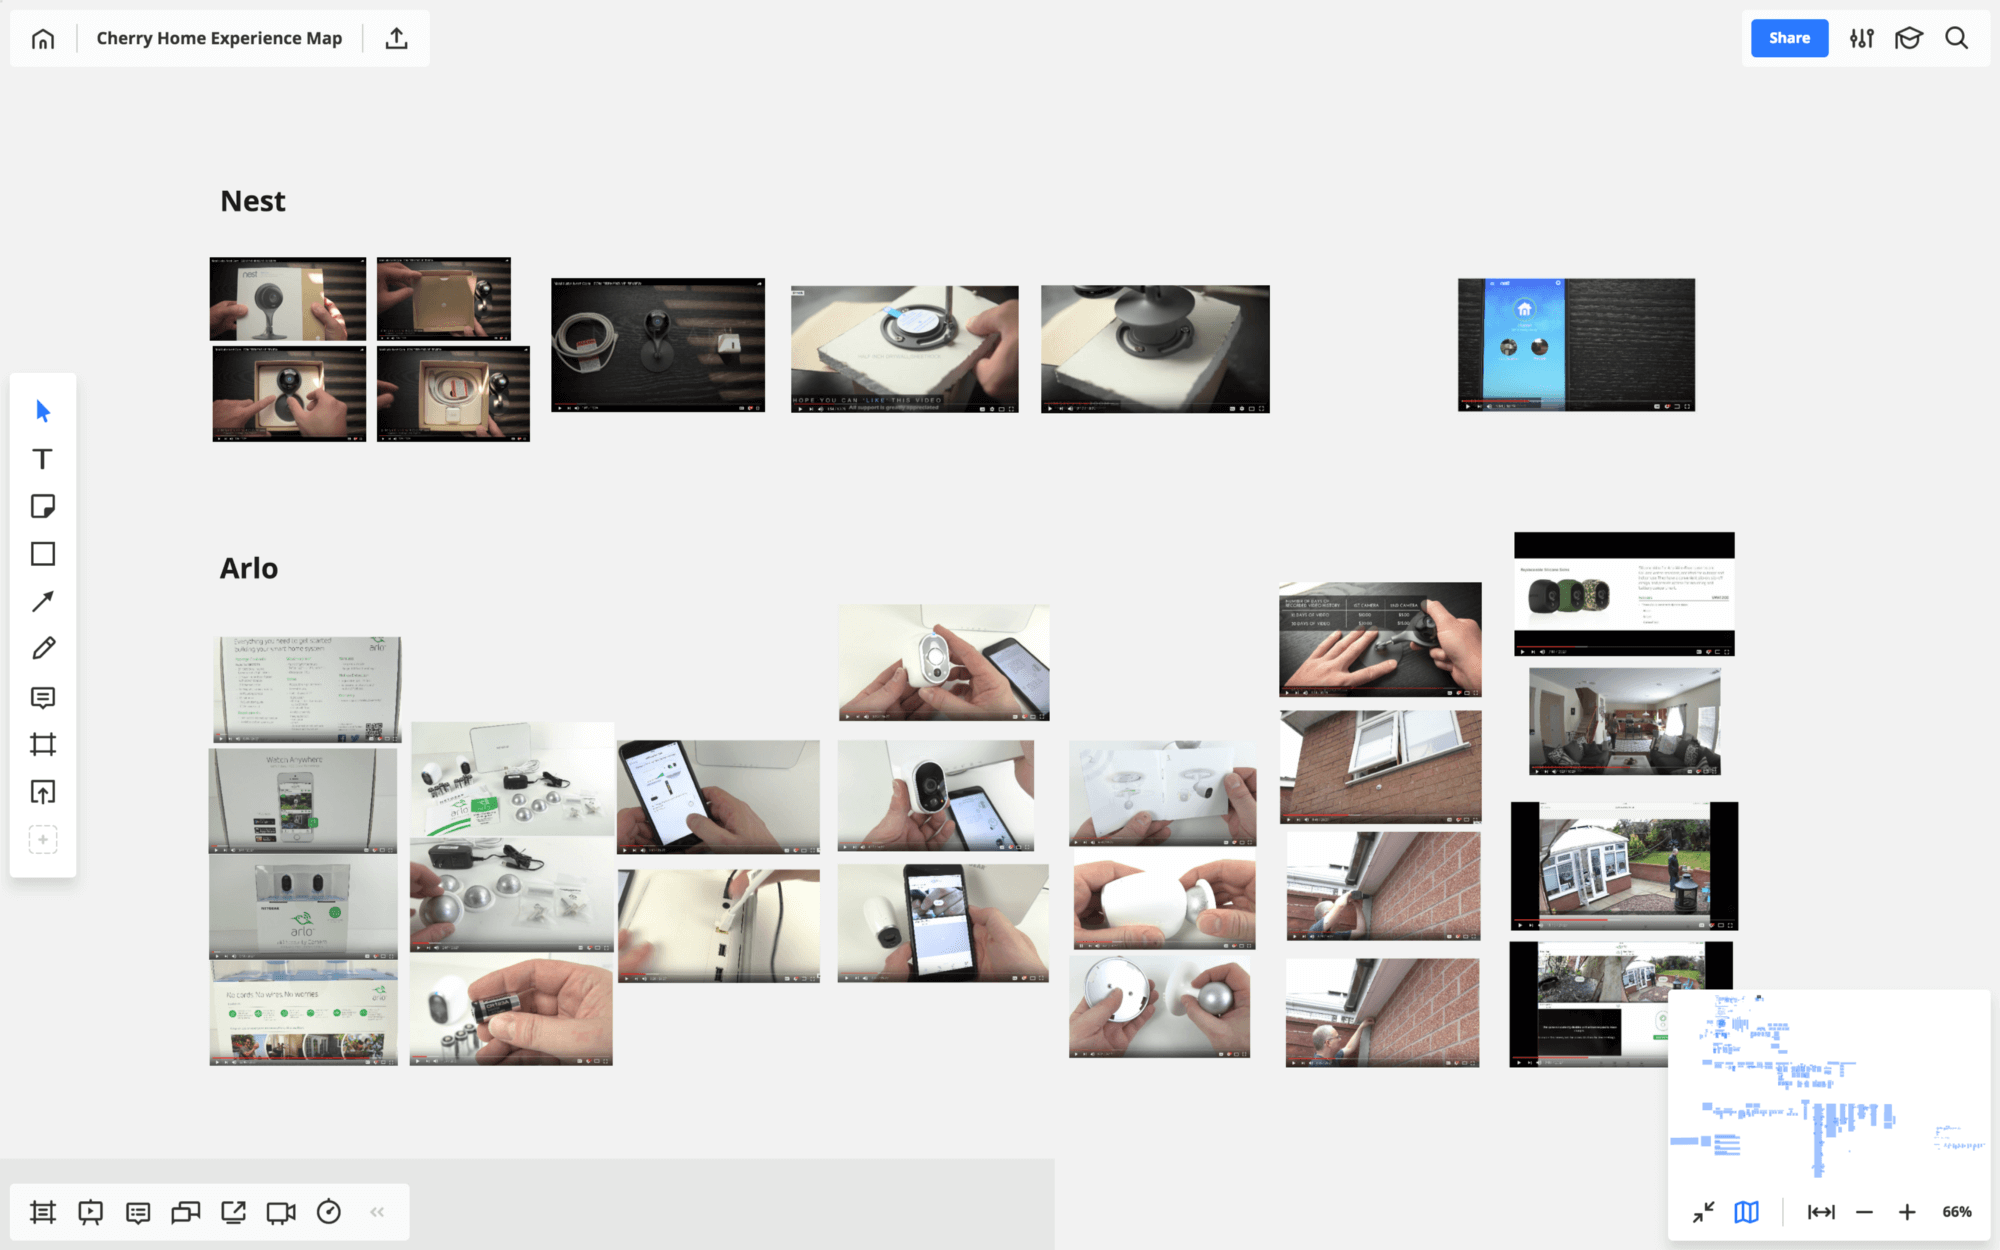 Unboxing video screenshots laid out in Miro